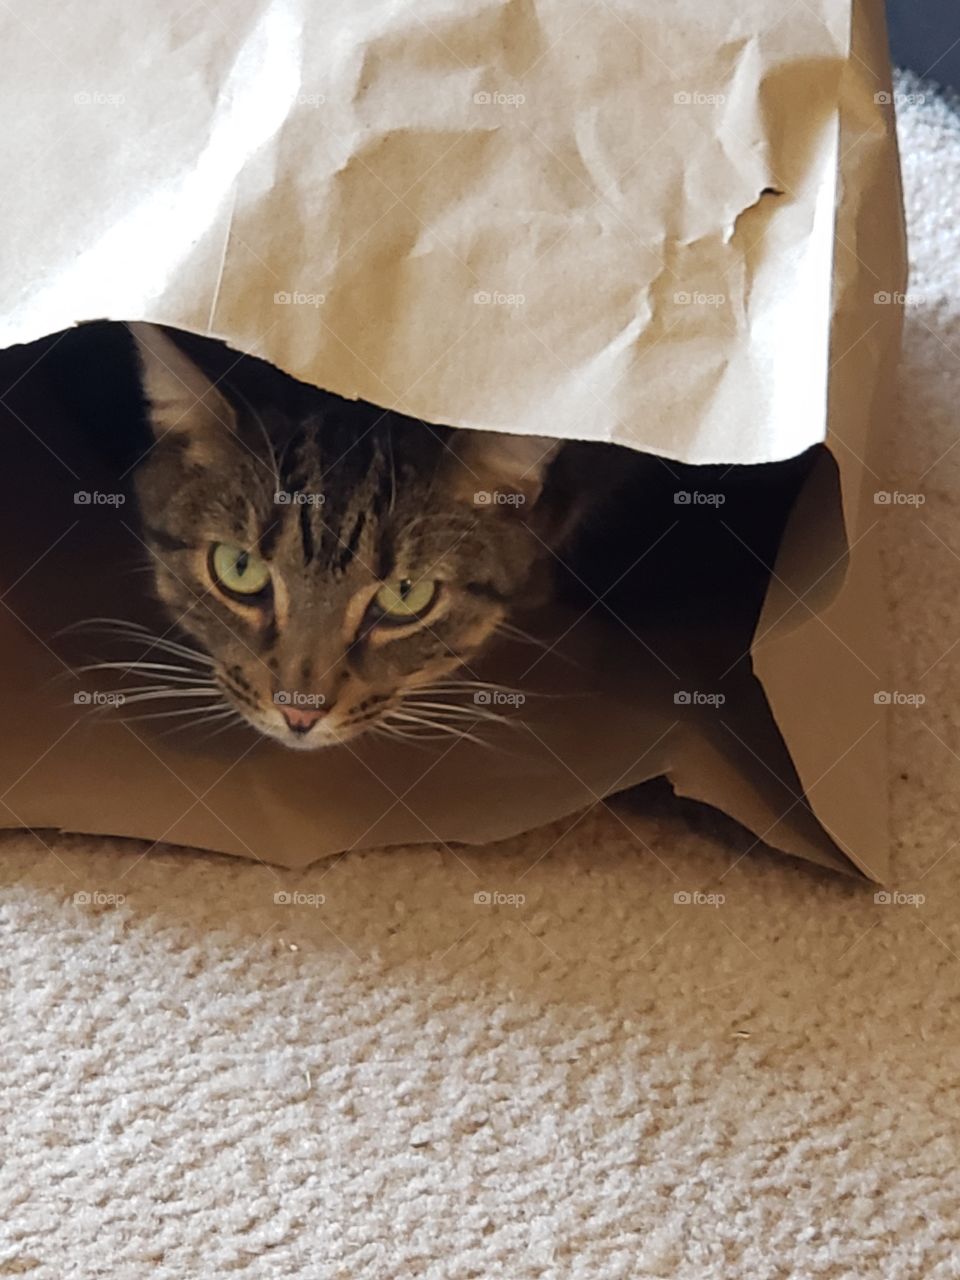 Rei is home inside his paper bag